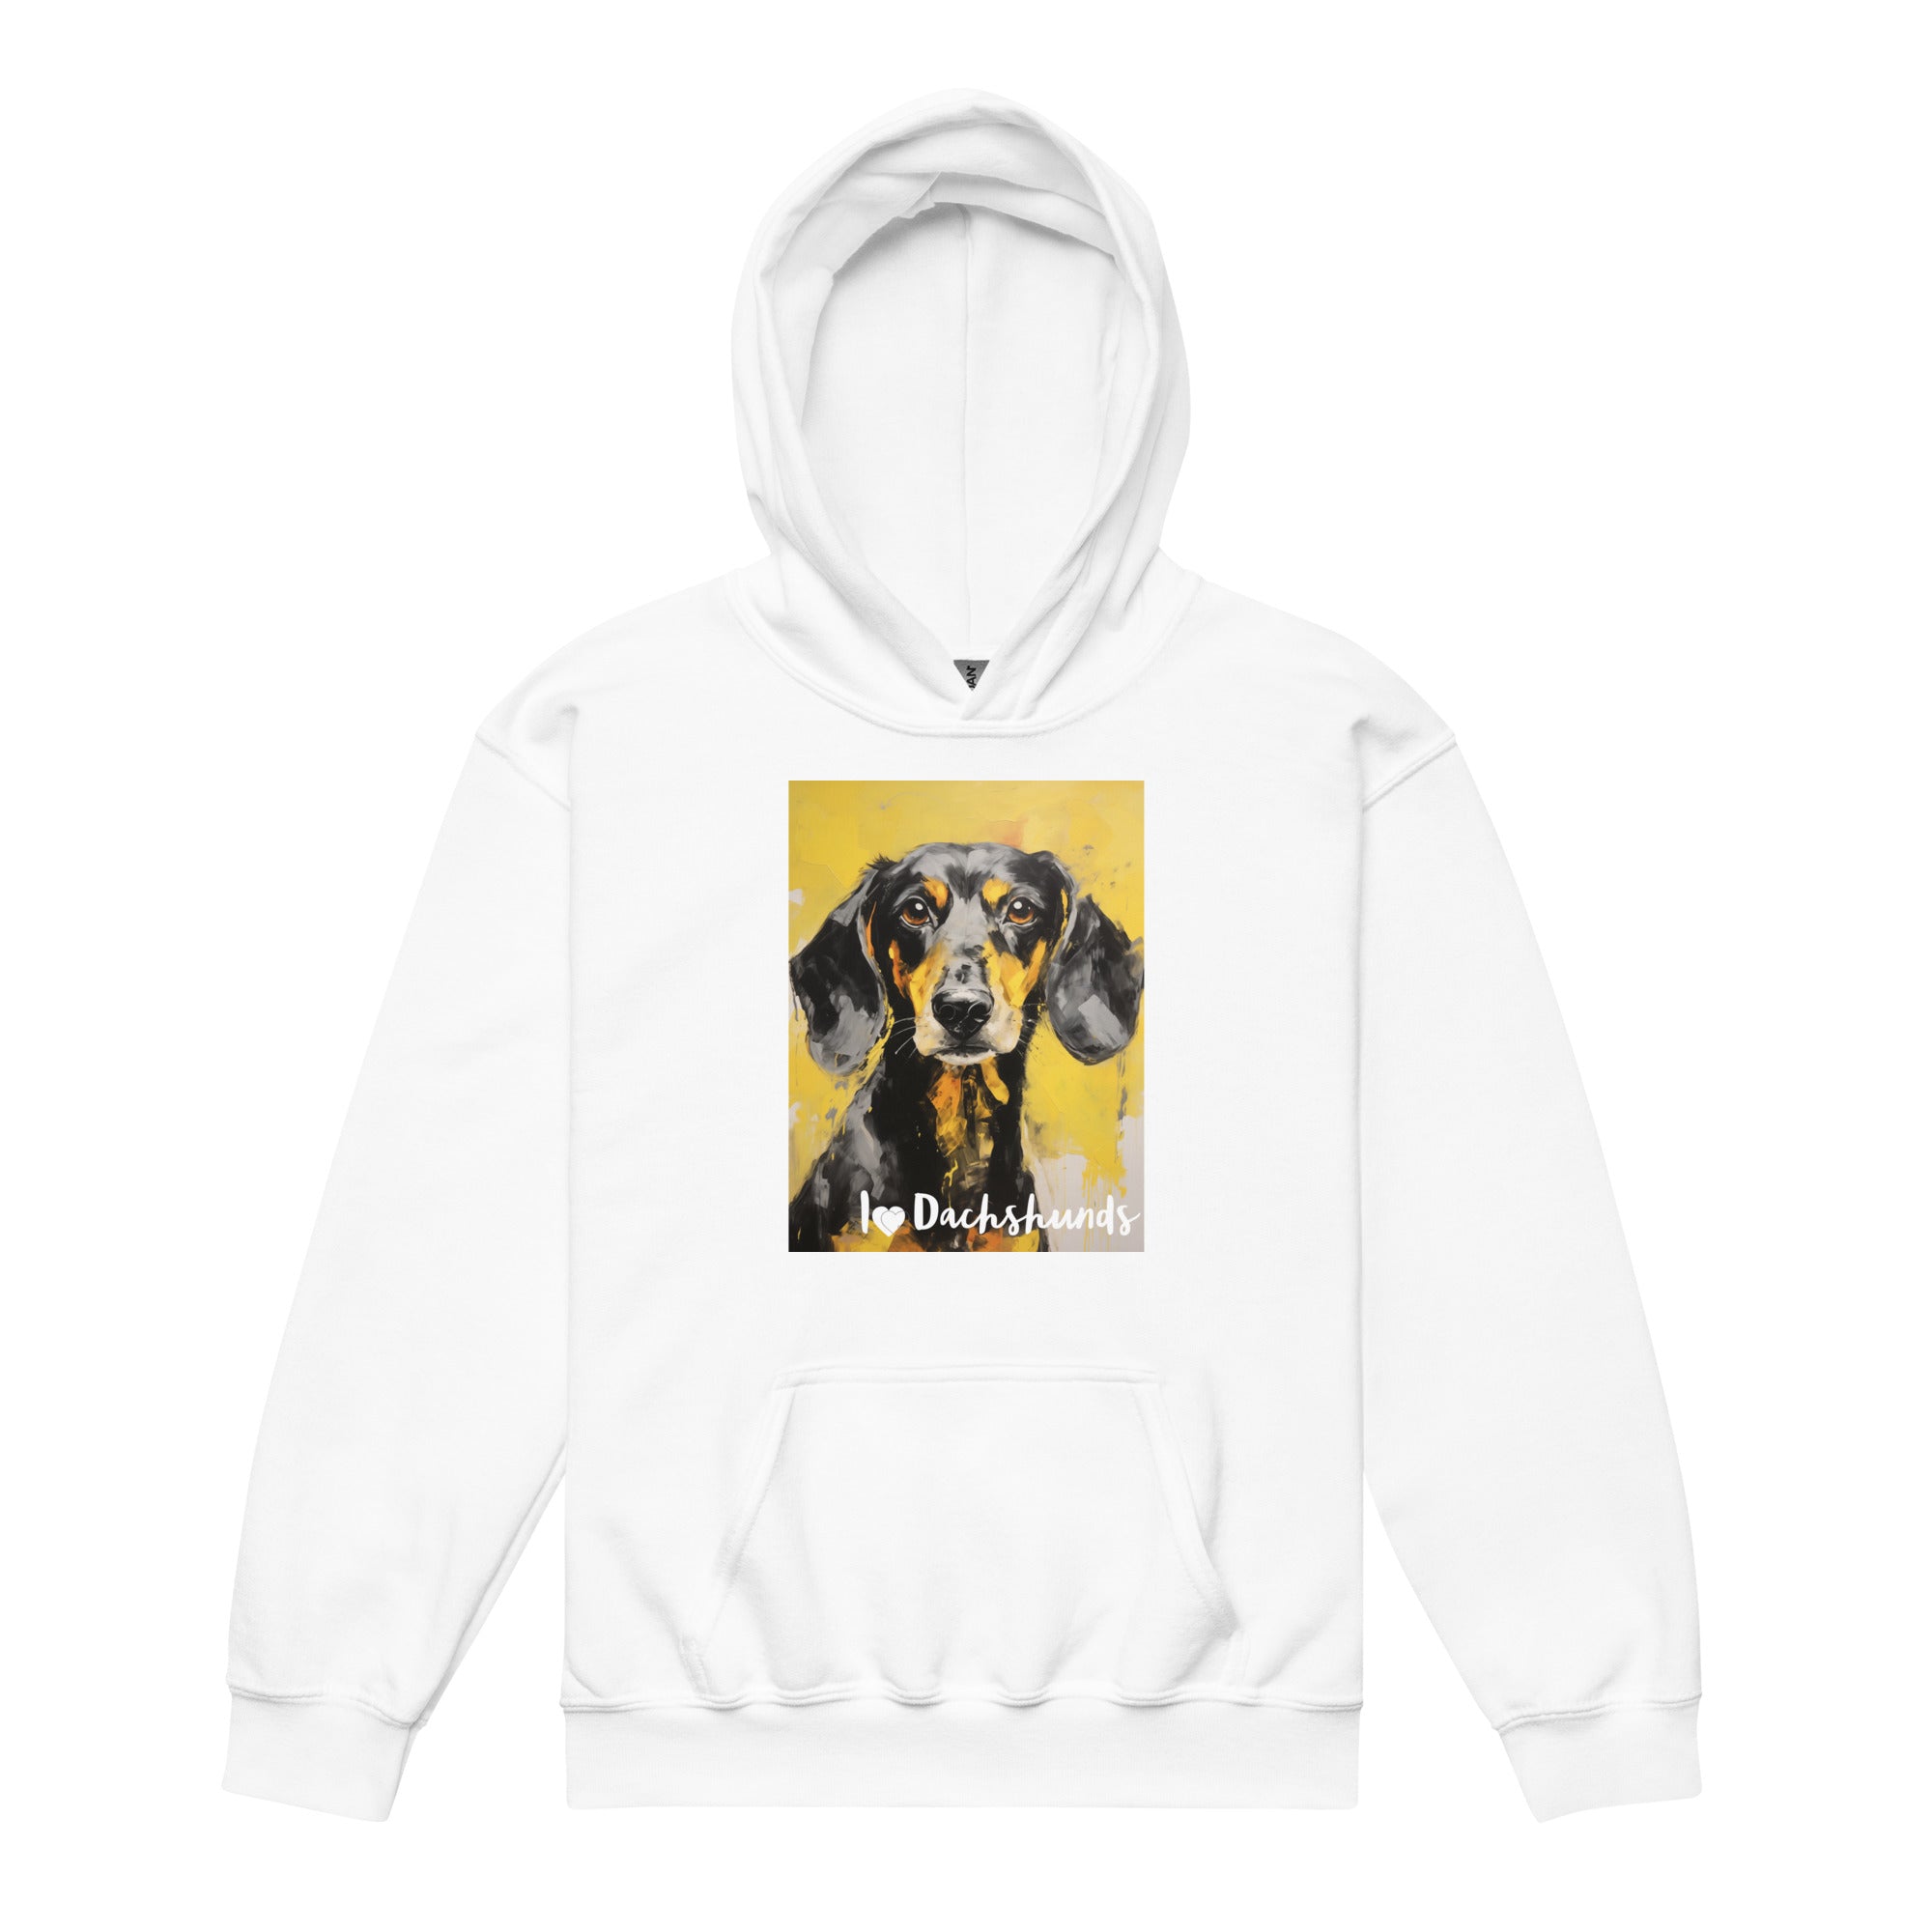 Youth heavy blend hoodie I ❤ Dogs - Dachshund